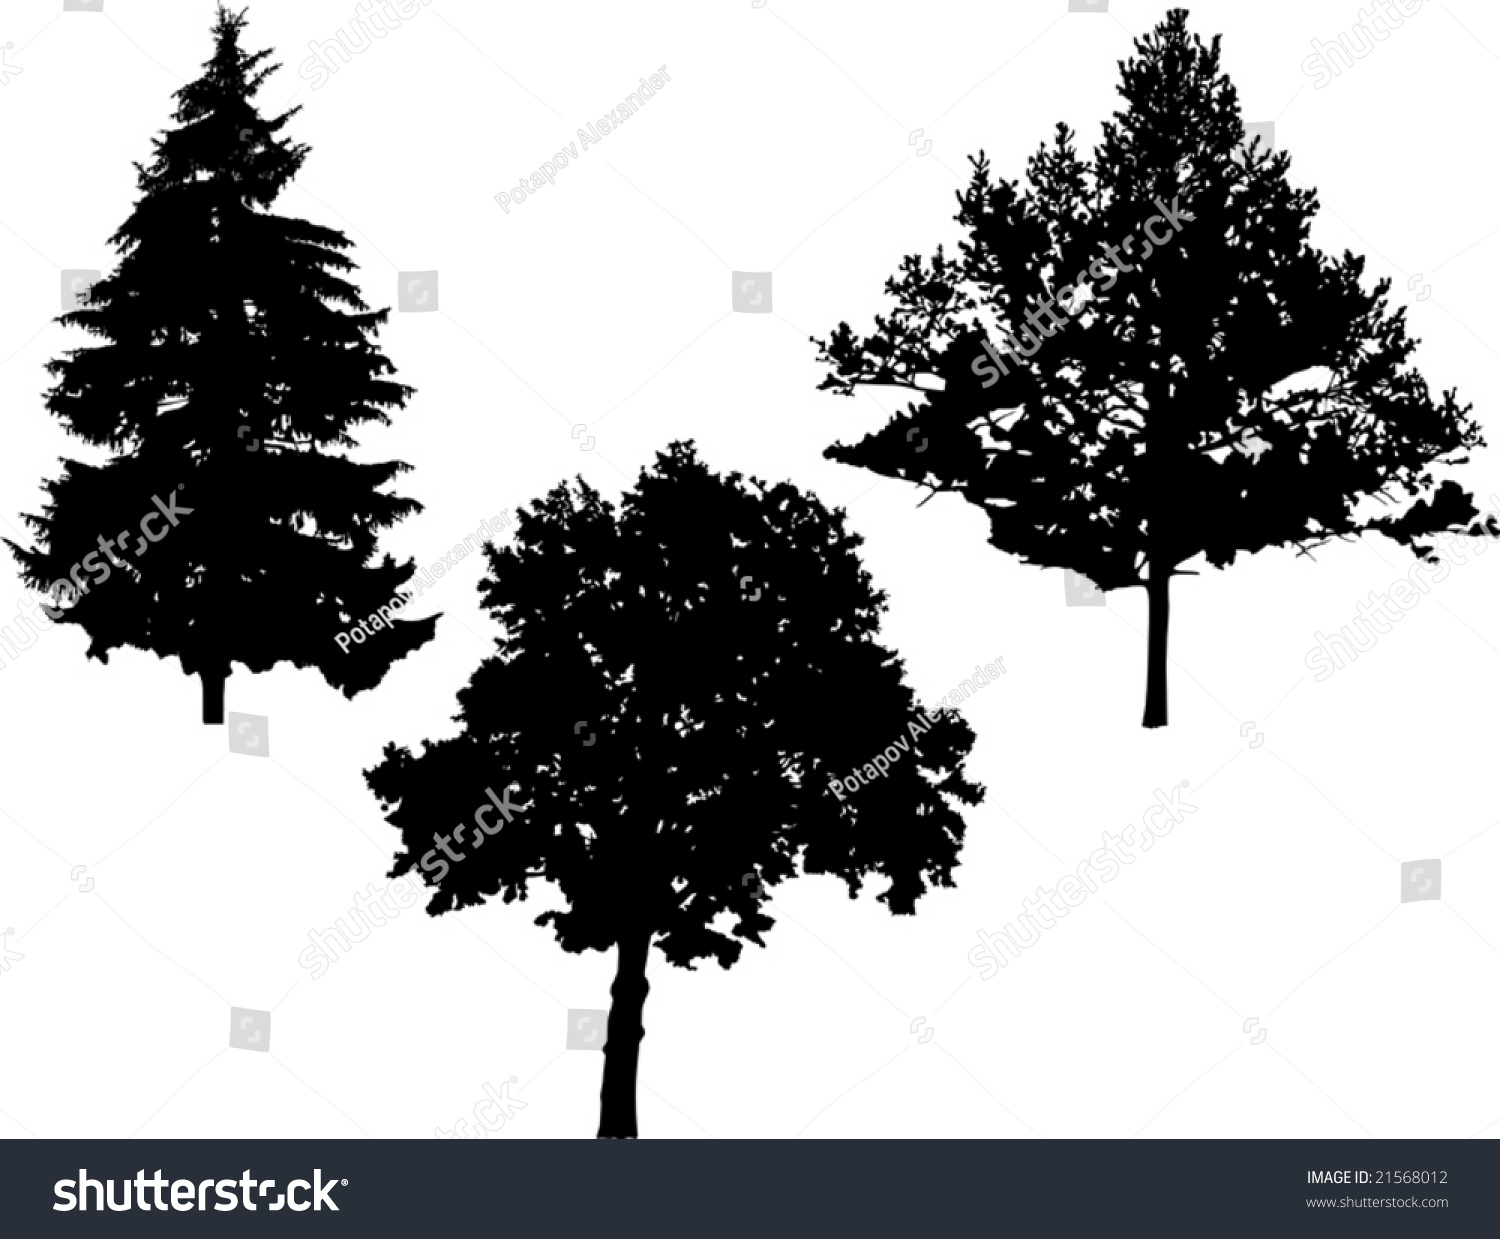 Illustration Trees Silhouette Isolated On White Stock Vector 21568012